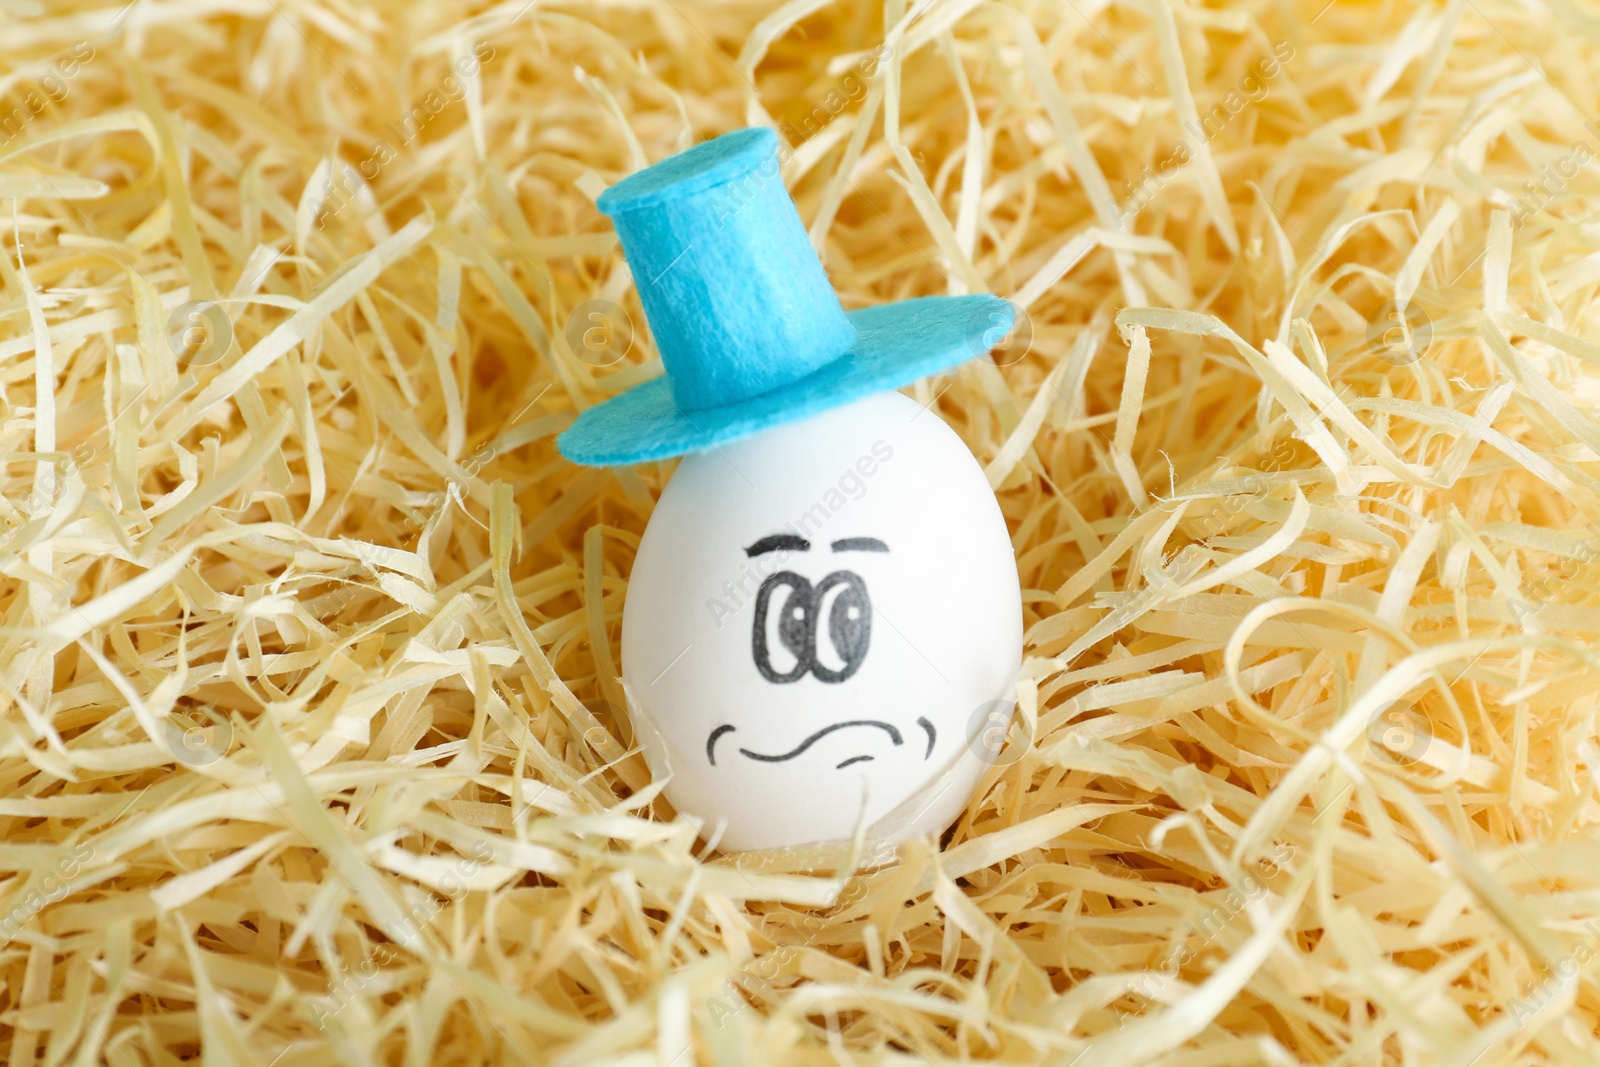 Photo of Egg with drawn thoughtful face and hat on straw